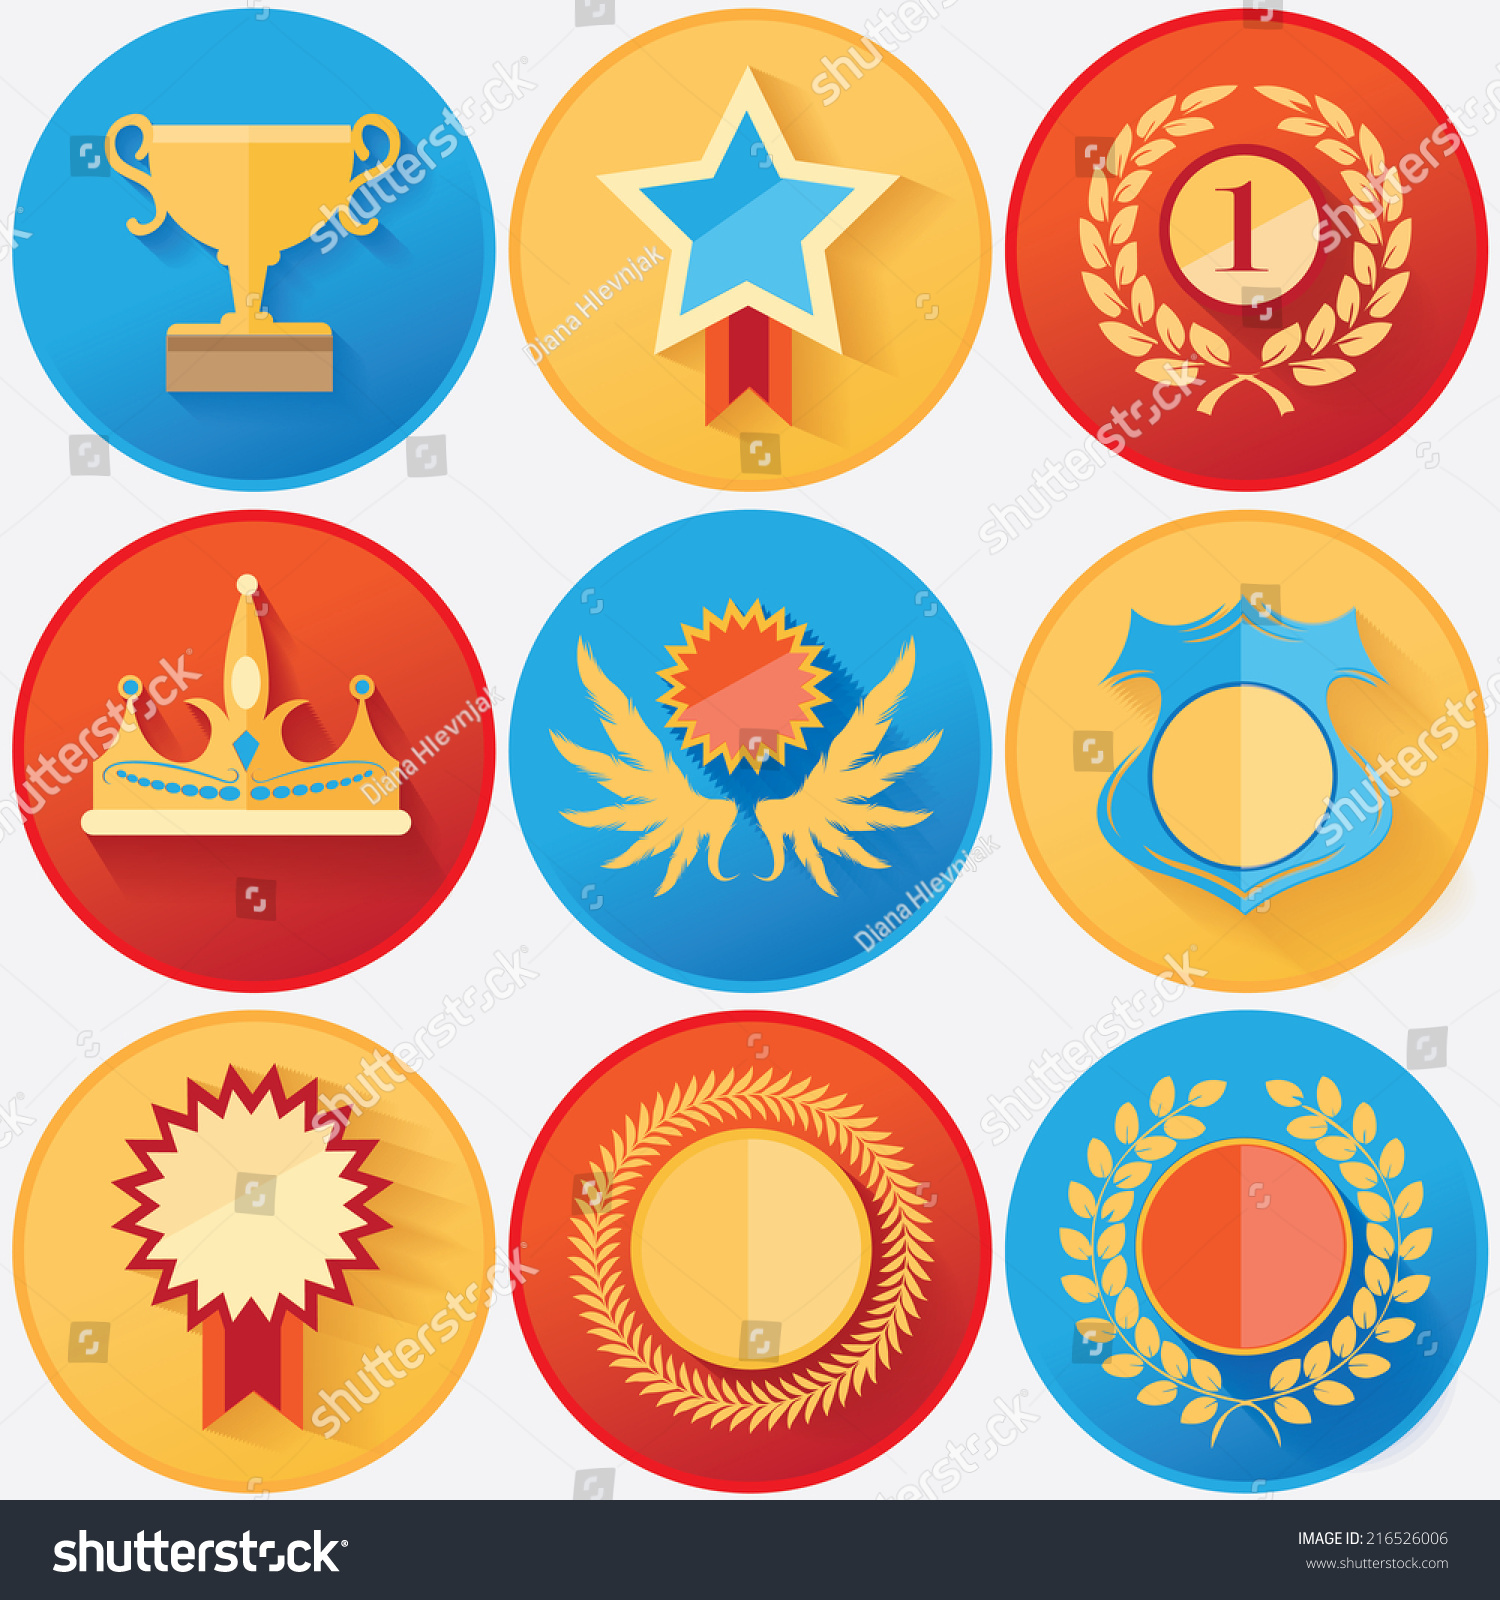 Rewards And Achievements Medals Set Collection- Round Colorful Icons ...